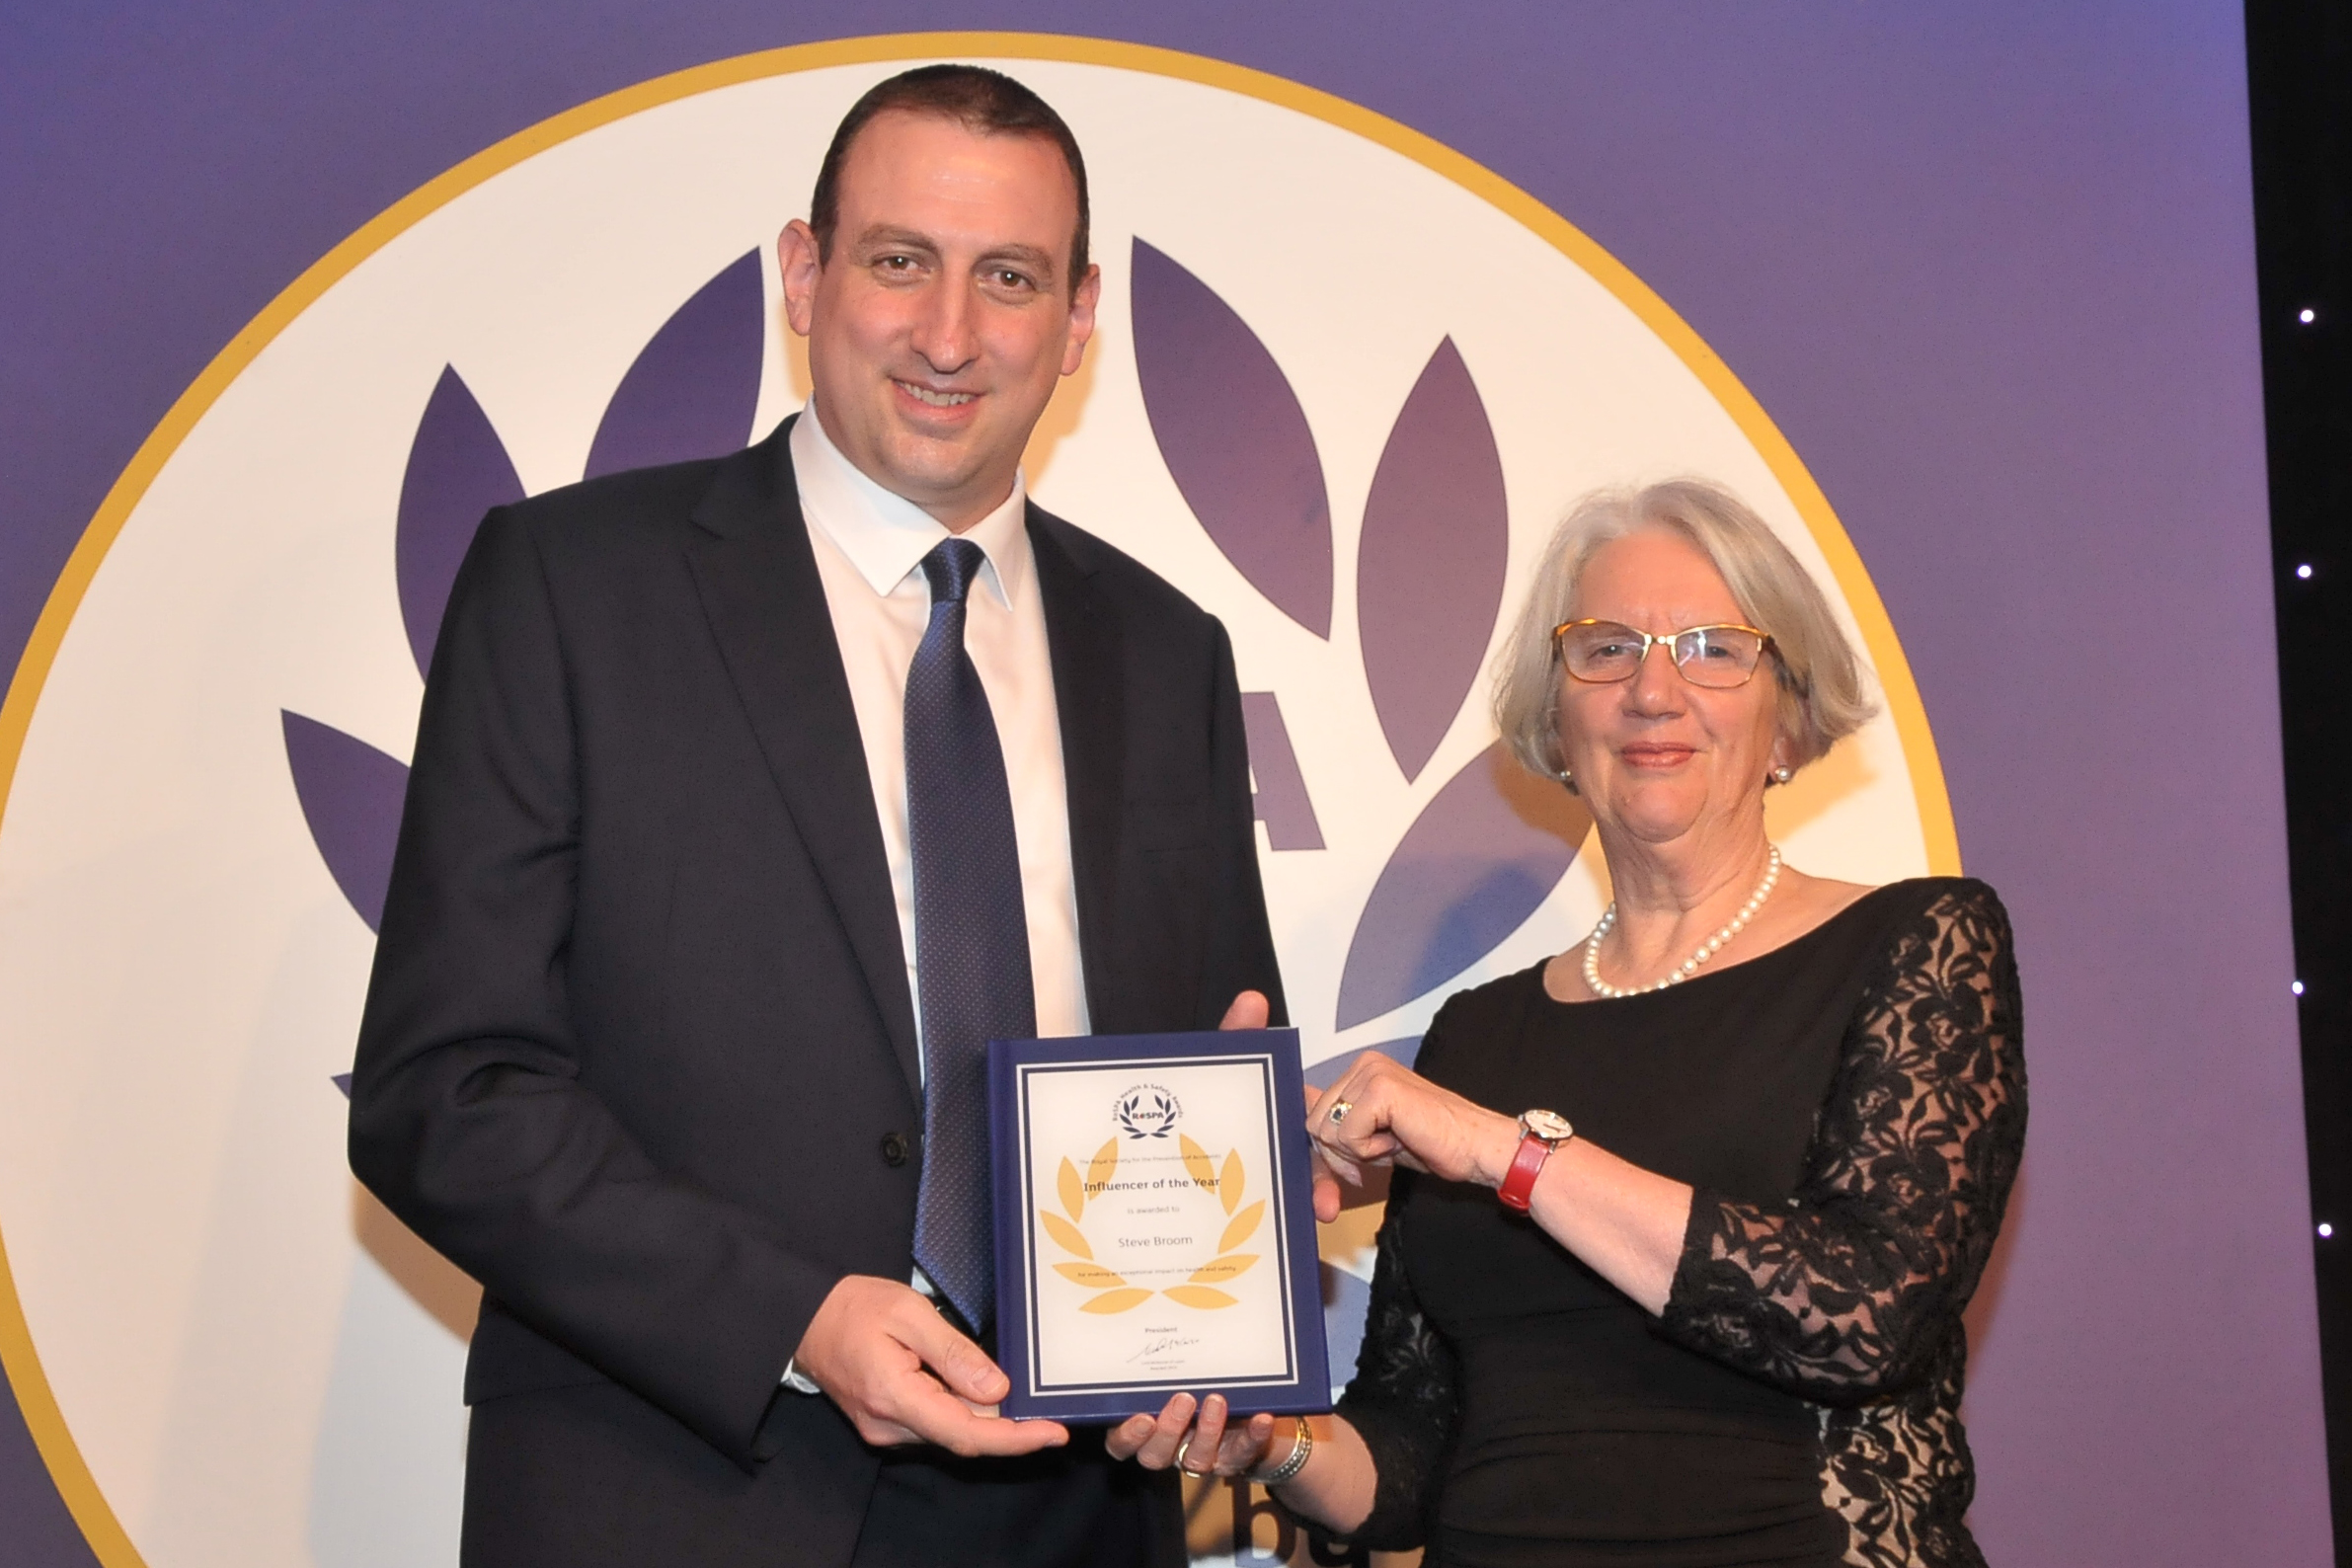 Dyer & Butler Director of Safety, Sustainability & Training Wins RoSPA Award